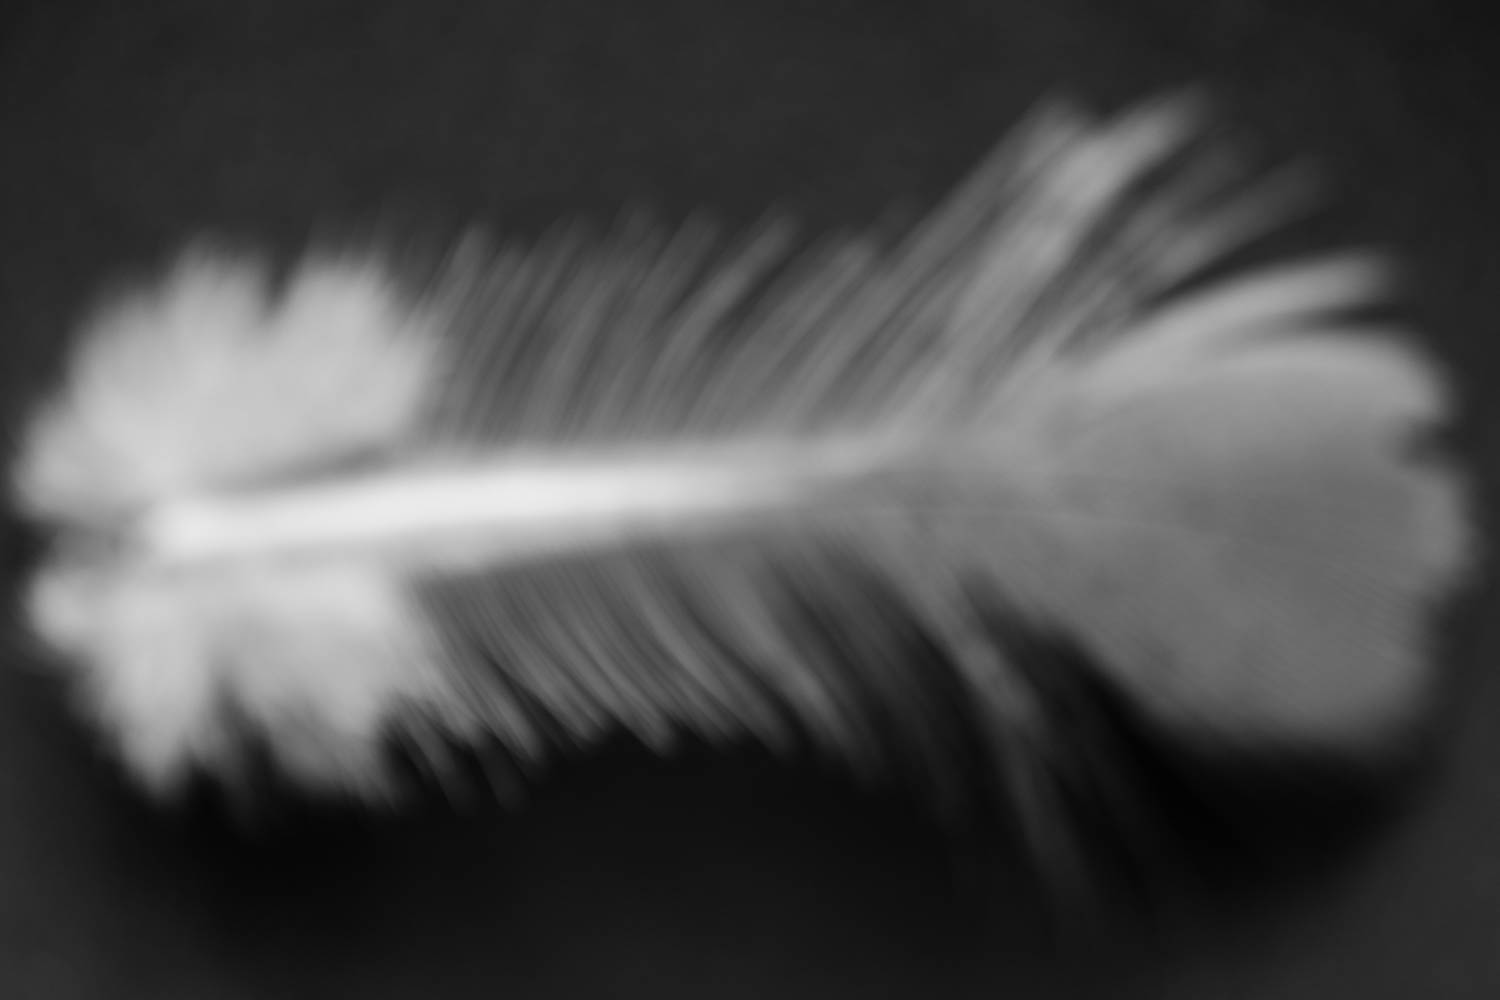 Black and white bird feather photo with a soft focus.